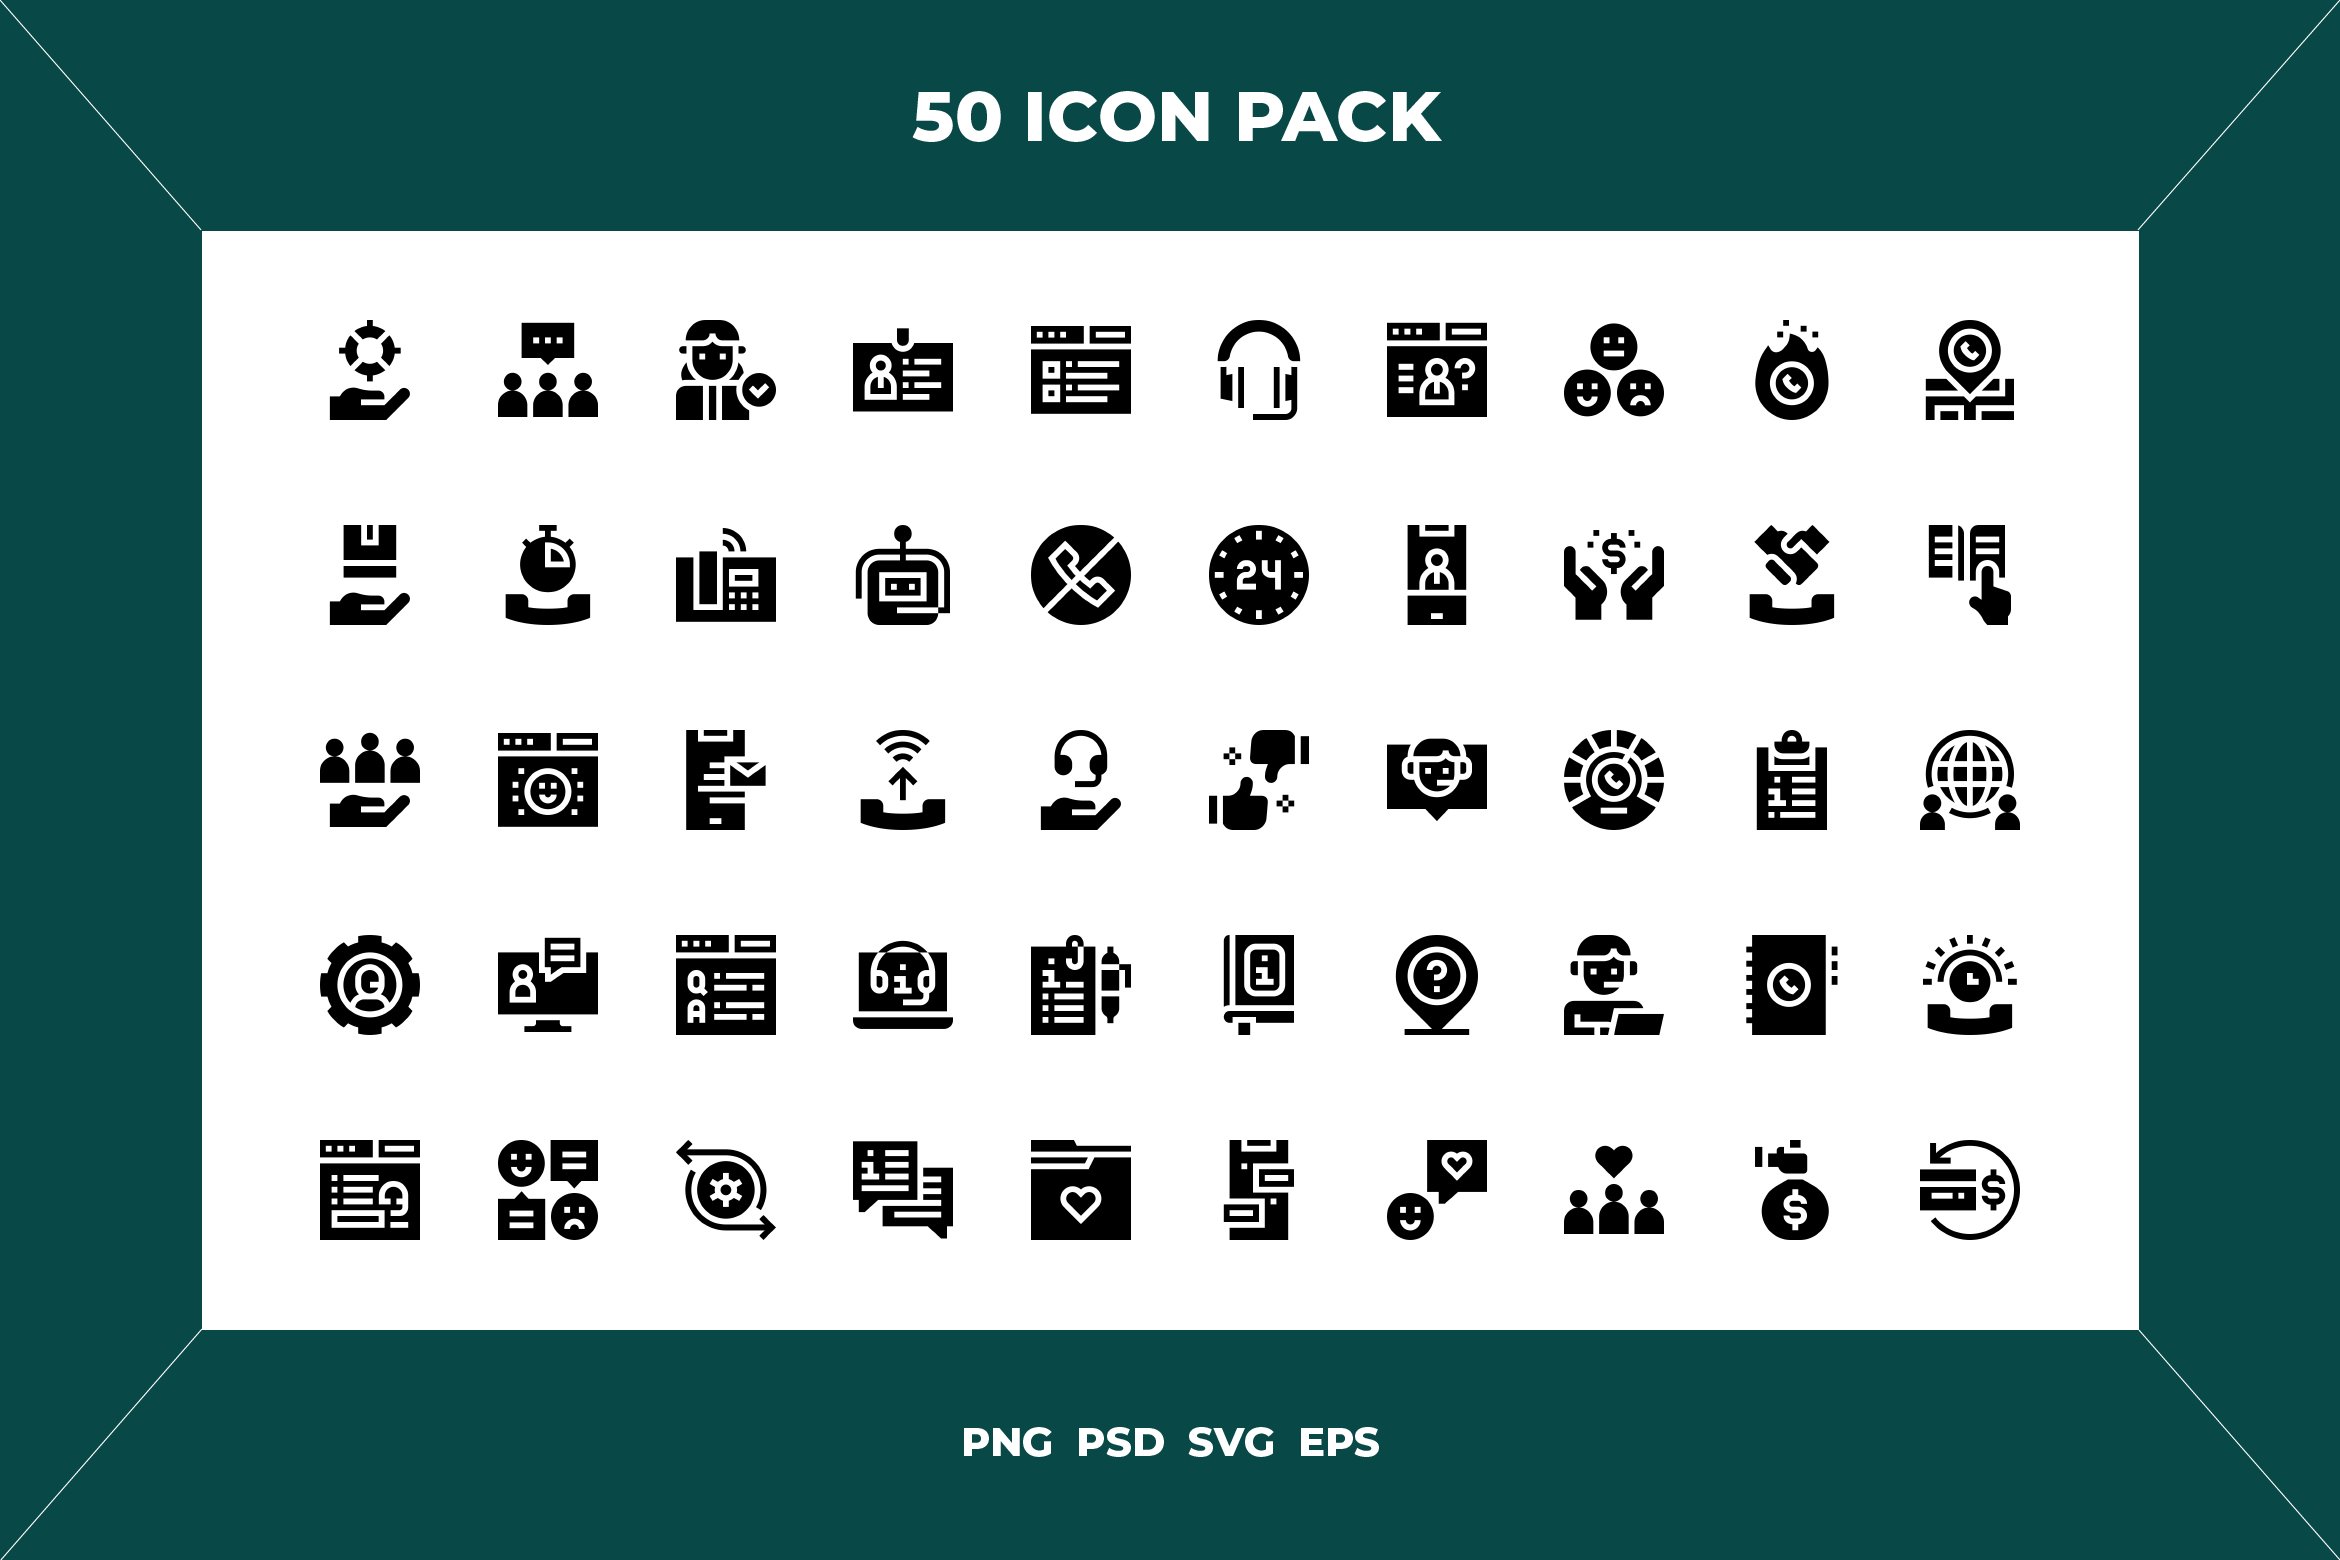 Customer service icons cover image.